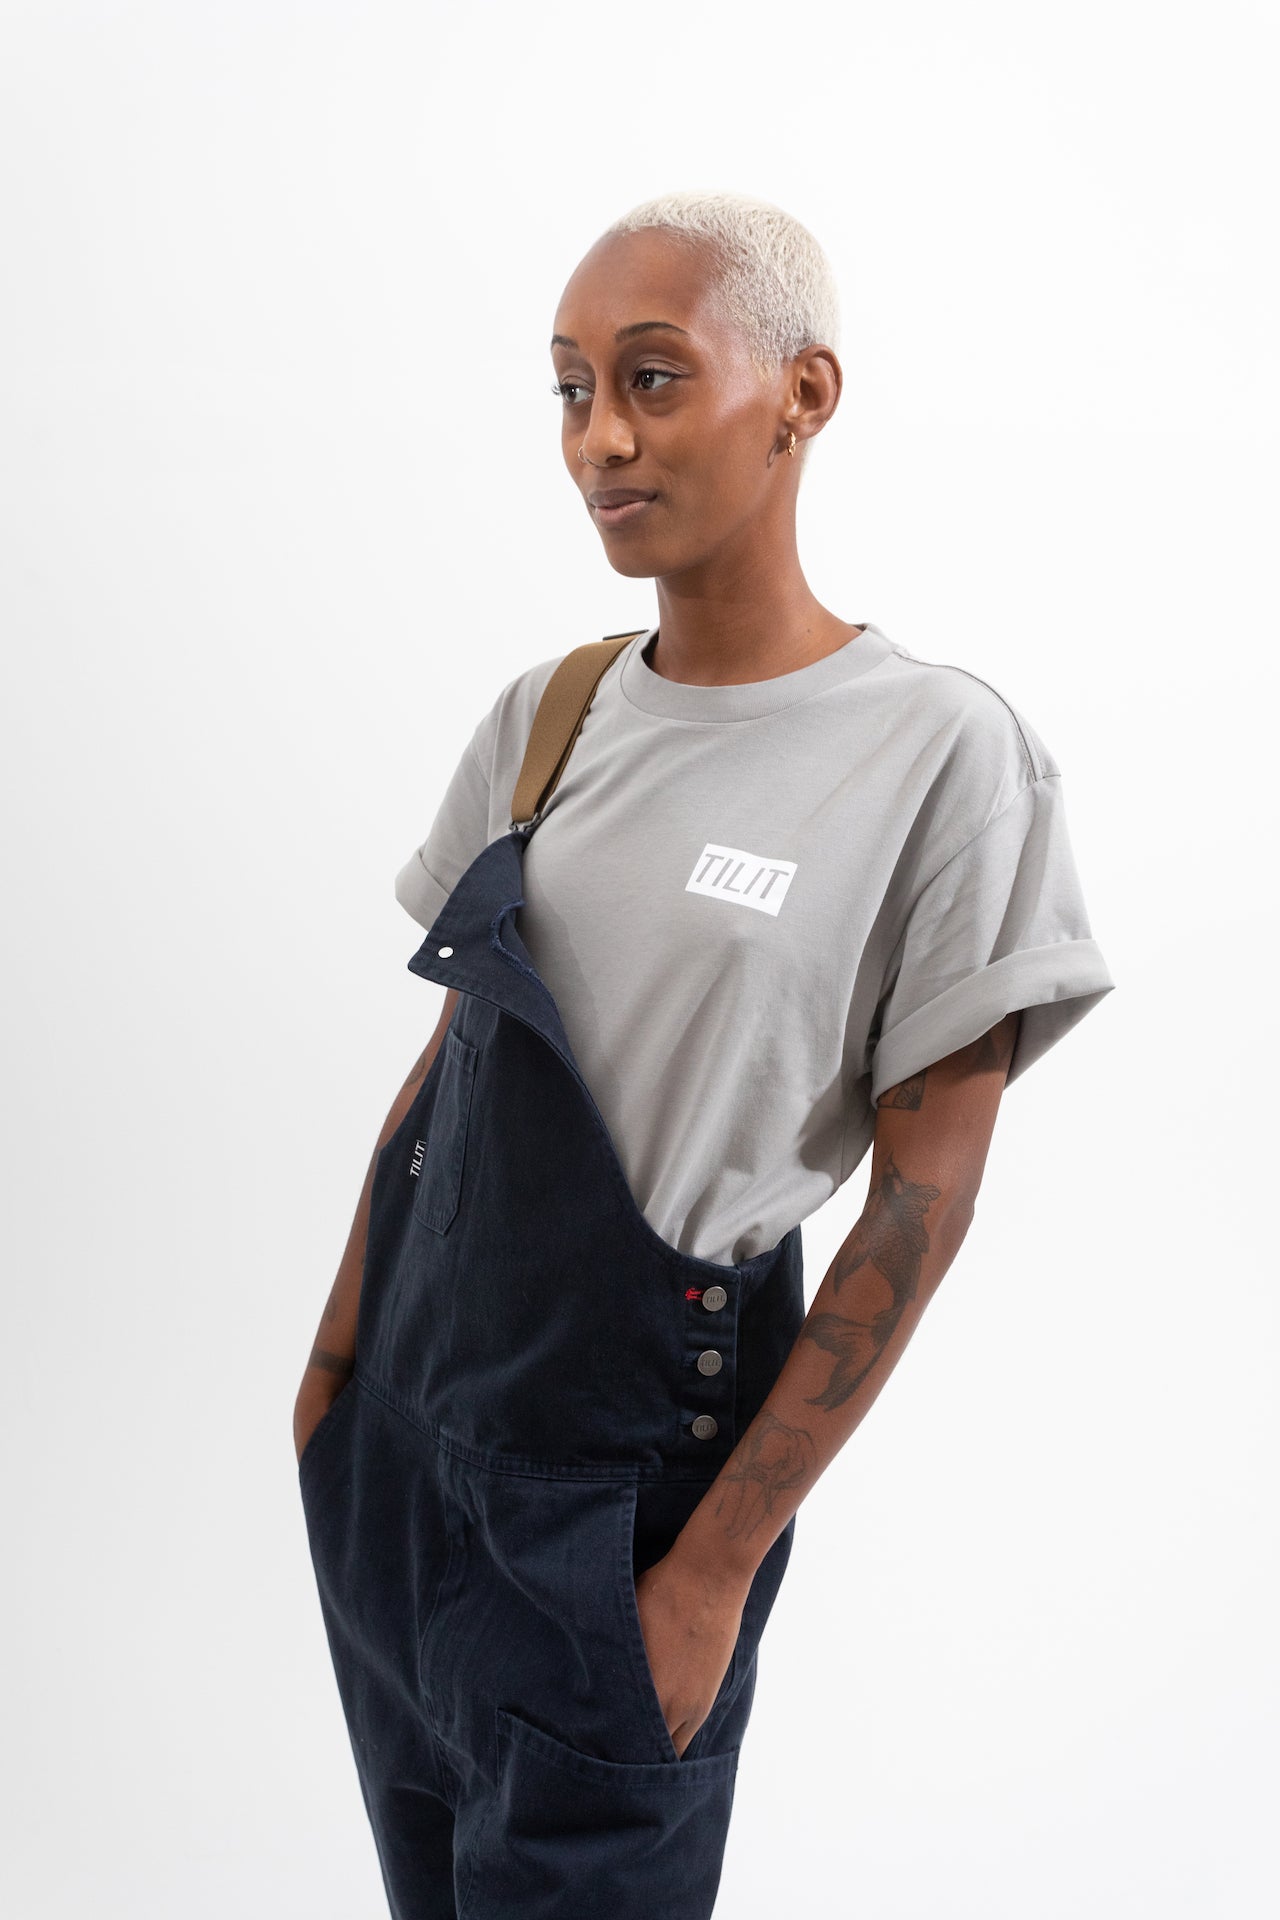 Work Overalls  Uniforms for WORK and LIFE – Tilit